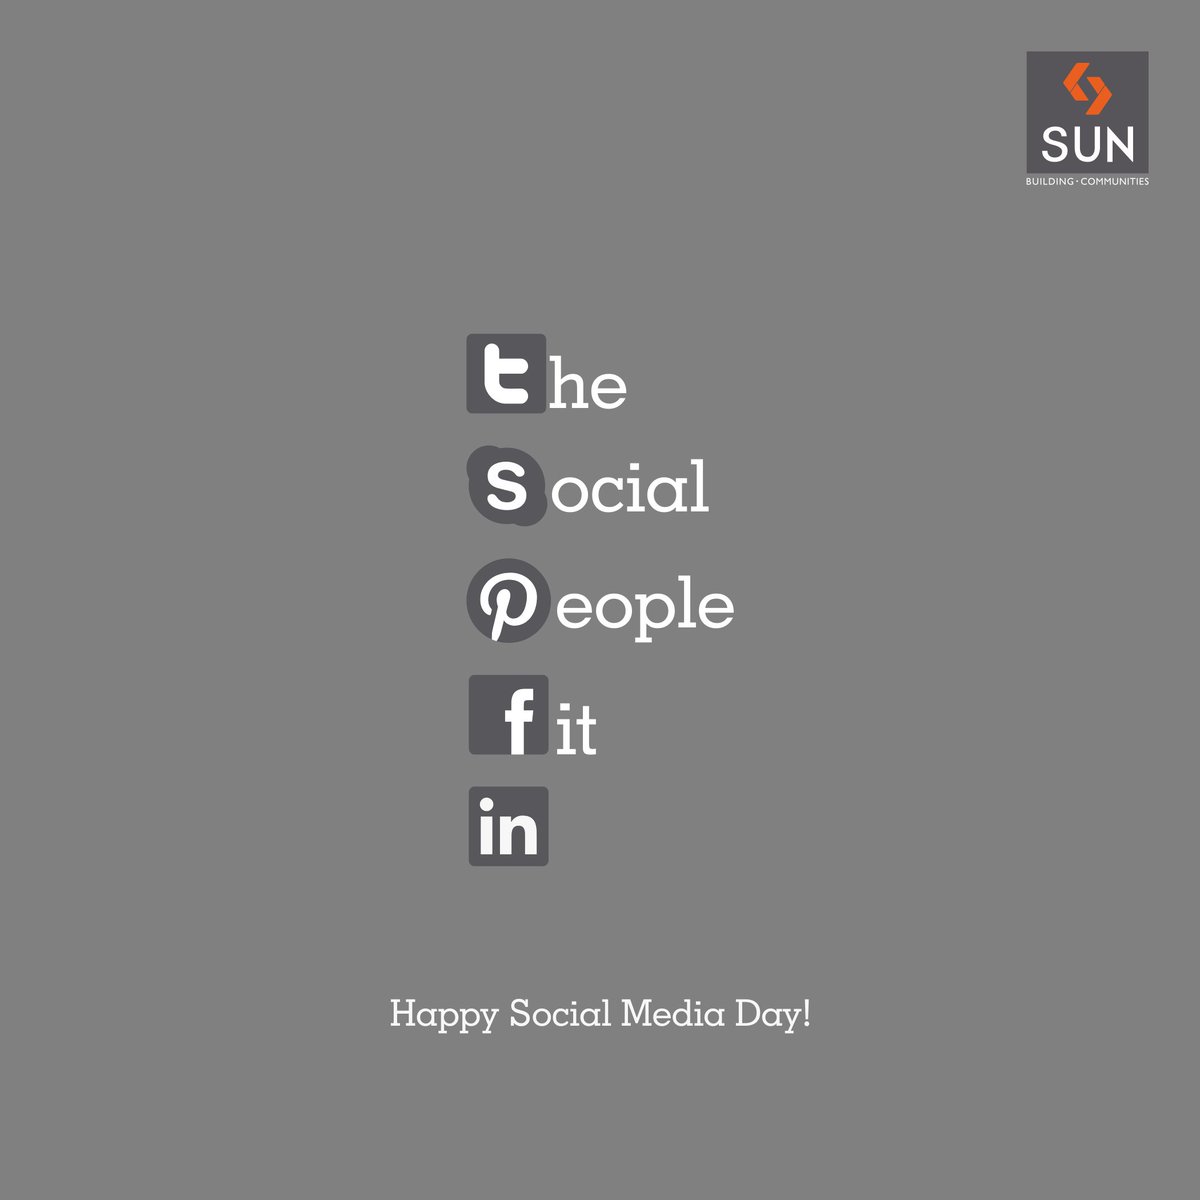 From #SocialMedia buffs to those who use it for staying connected, you fit in perfectly here.
Happy #SocialMediaDay! https://t.co/5TJ04lWdrK